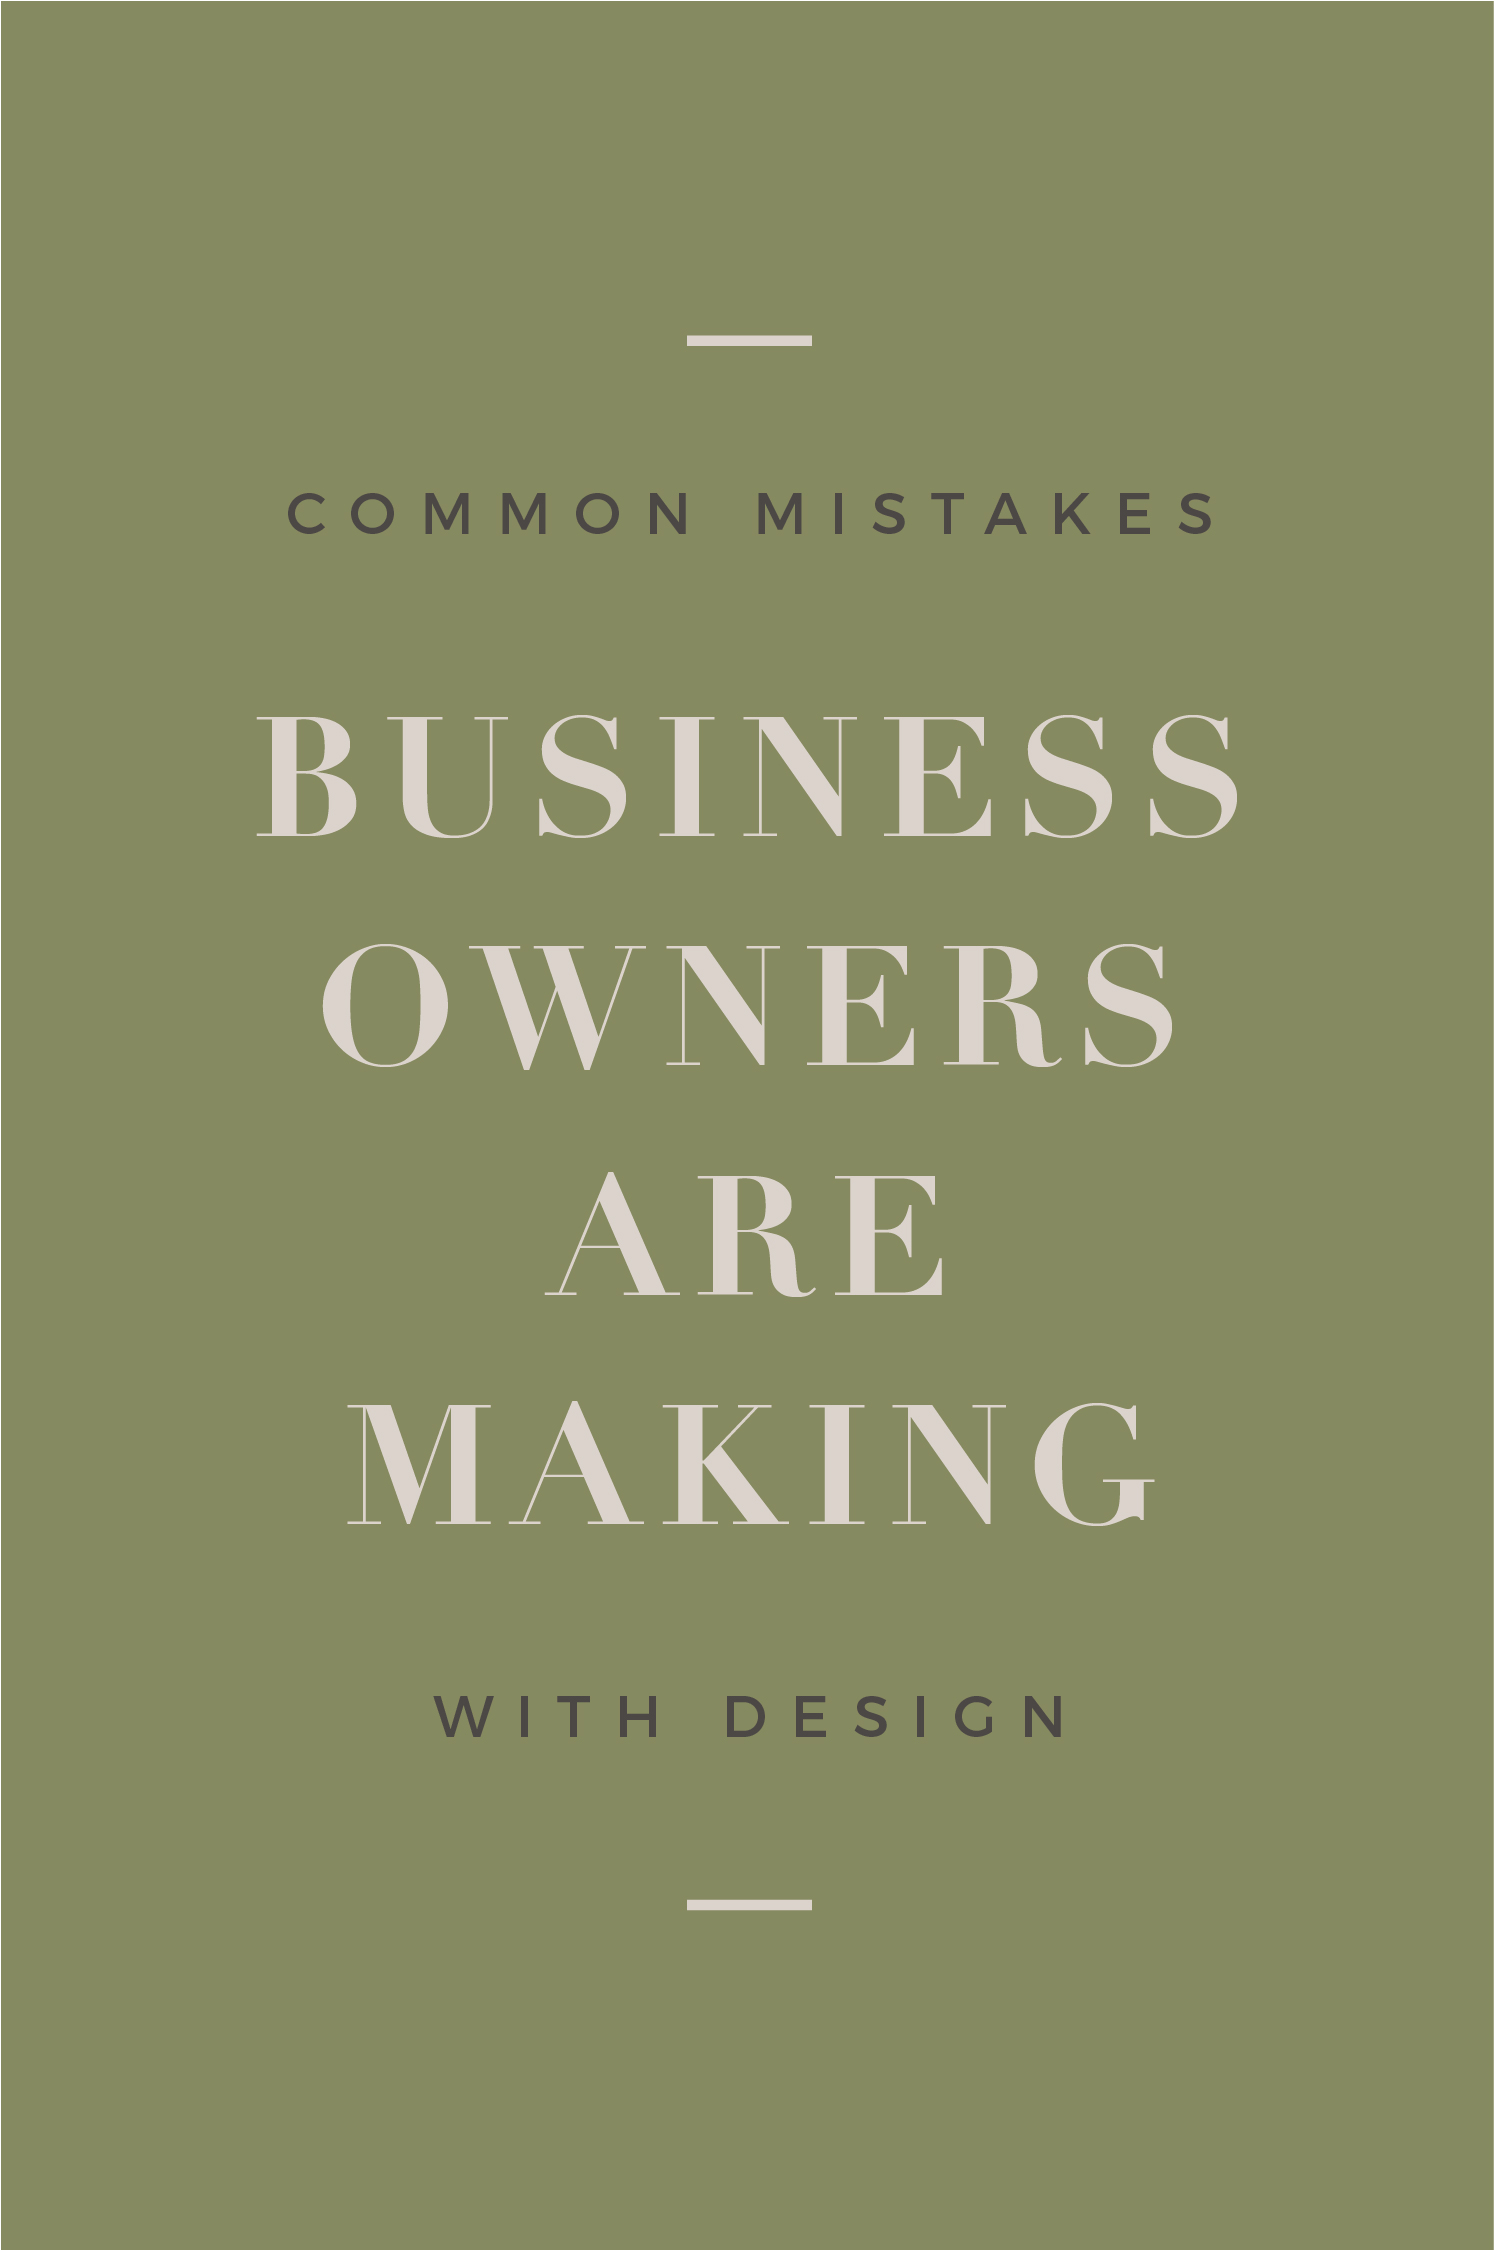 common mistakes business owners are making with design